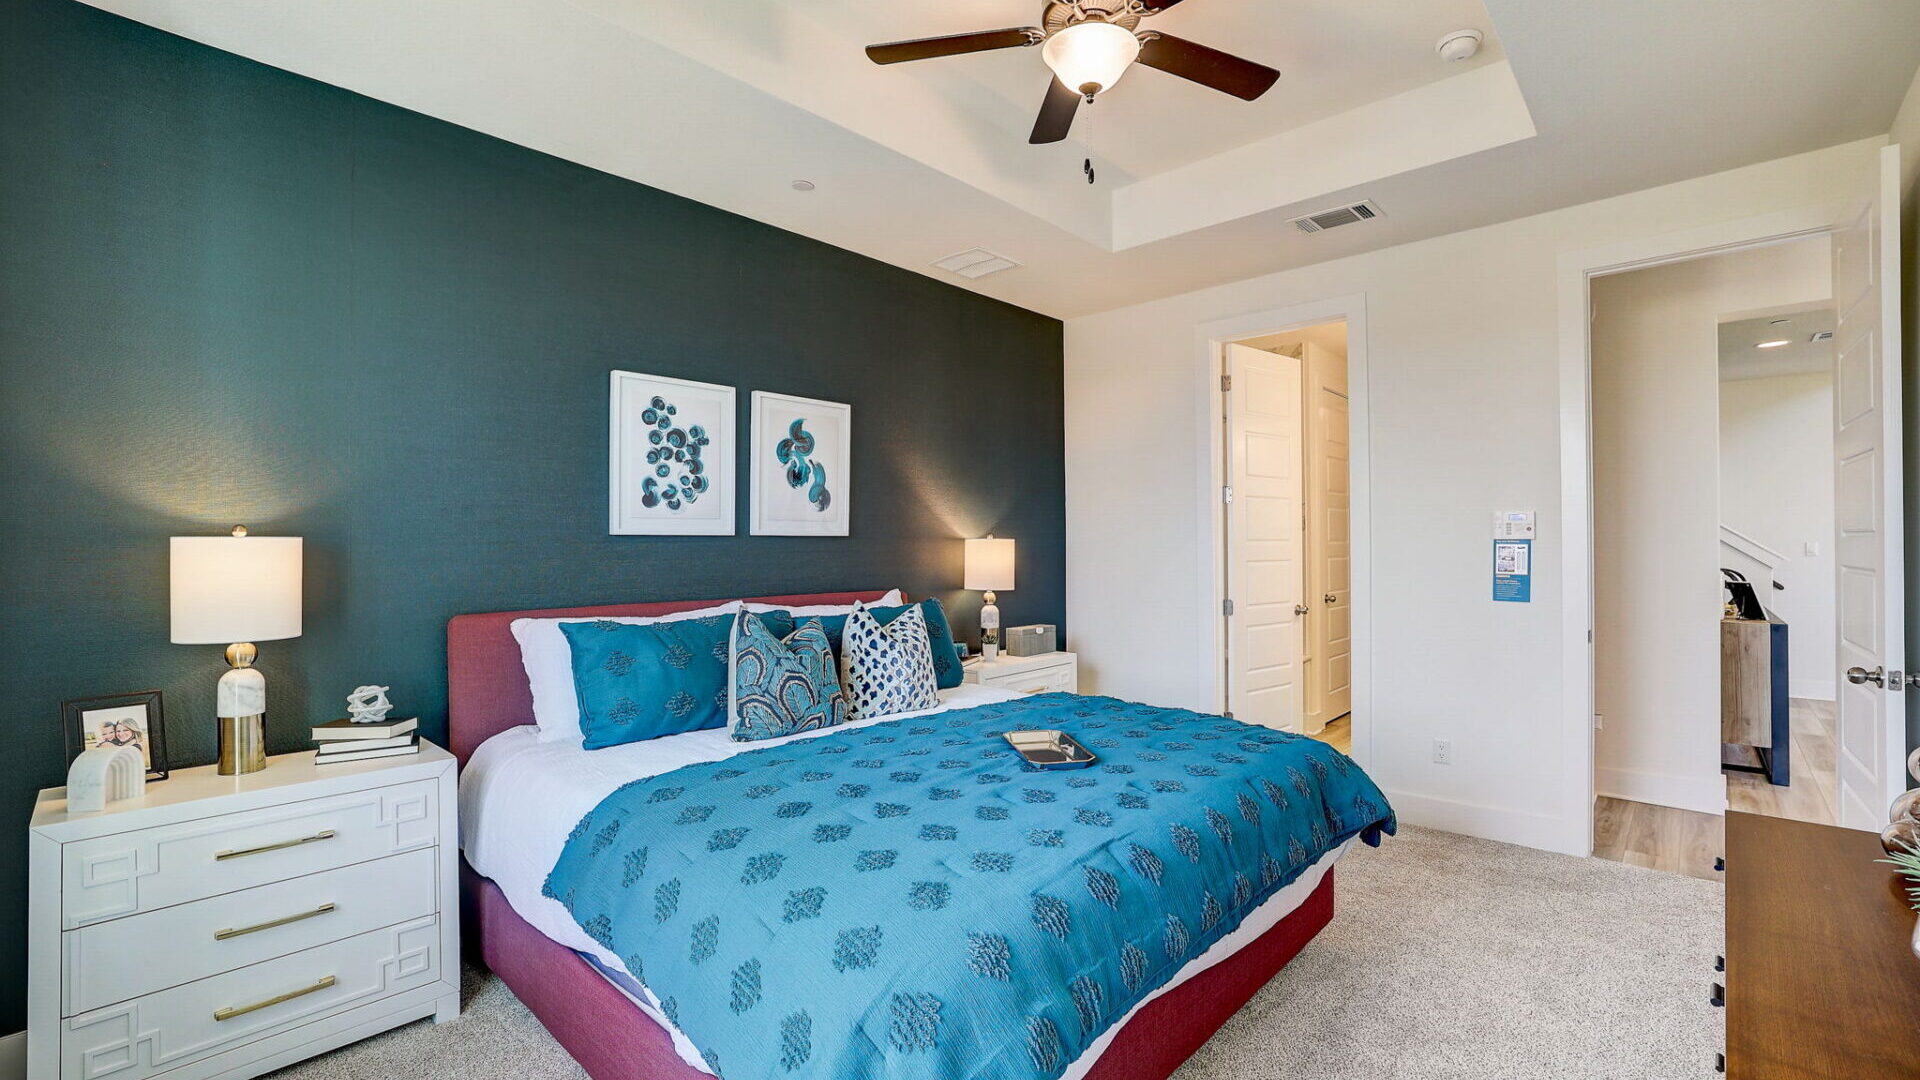 Avery Centre - Coming Soon! new homes in Round Rock, TX